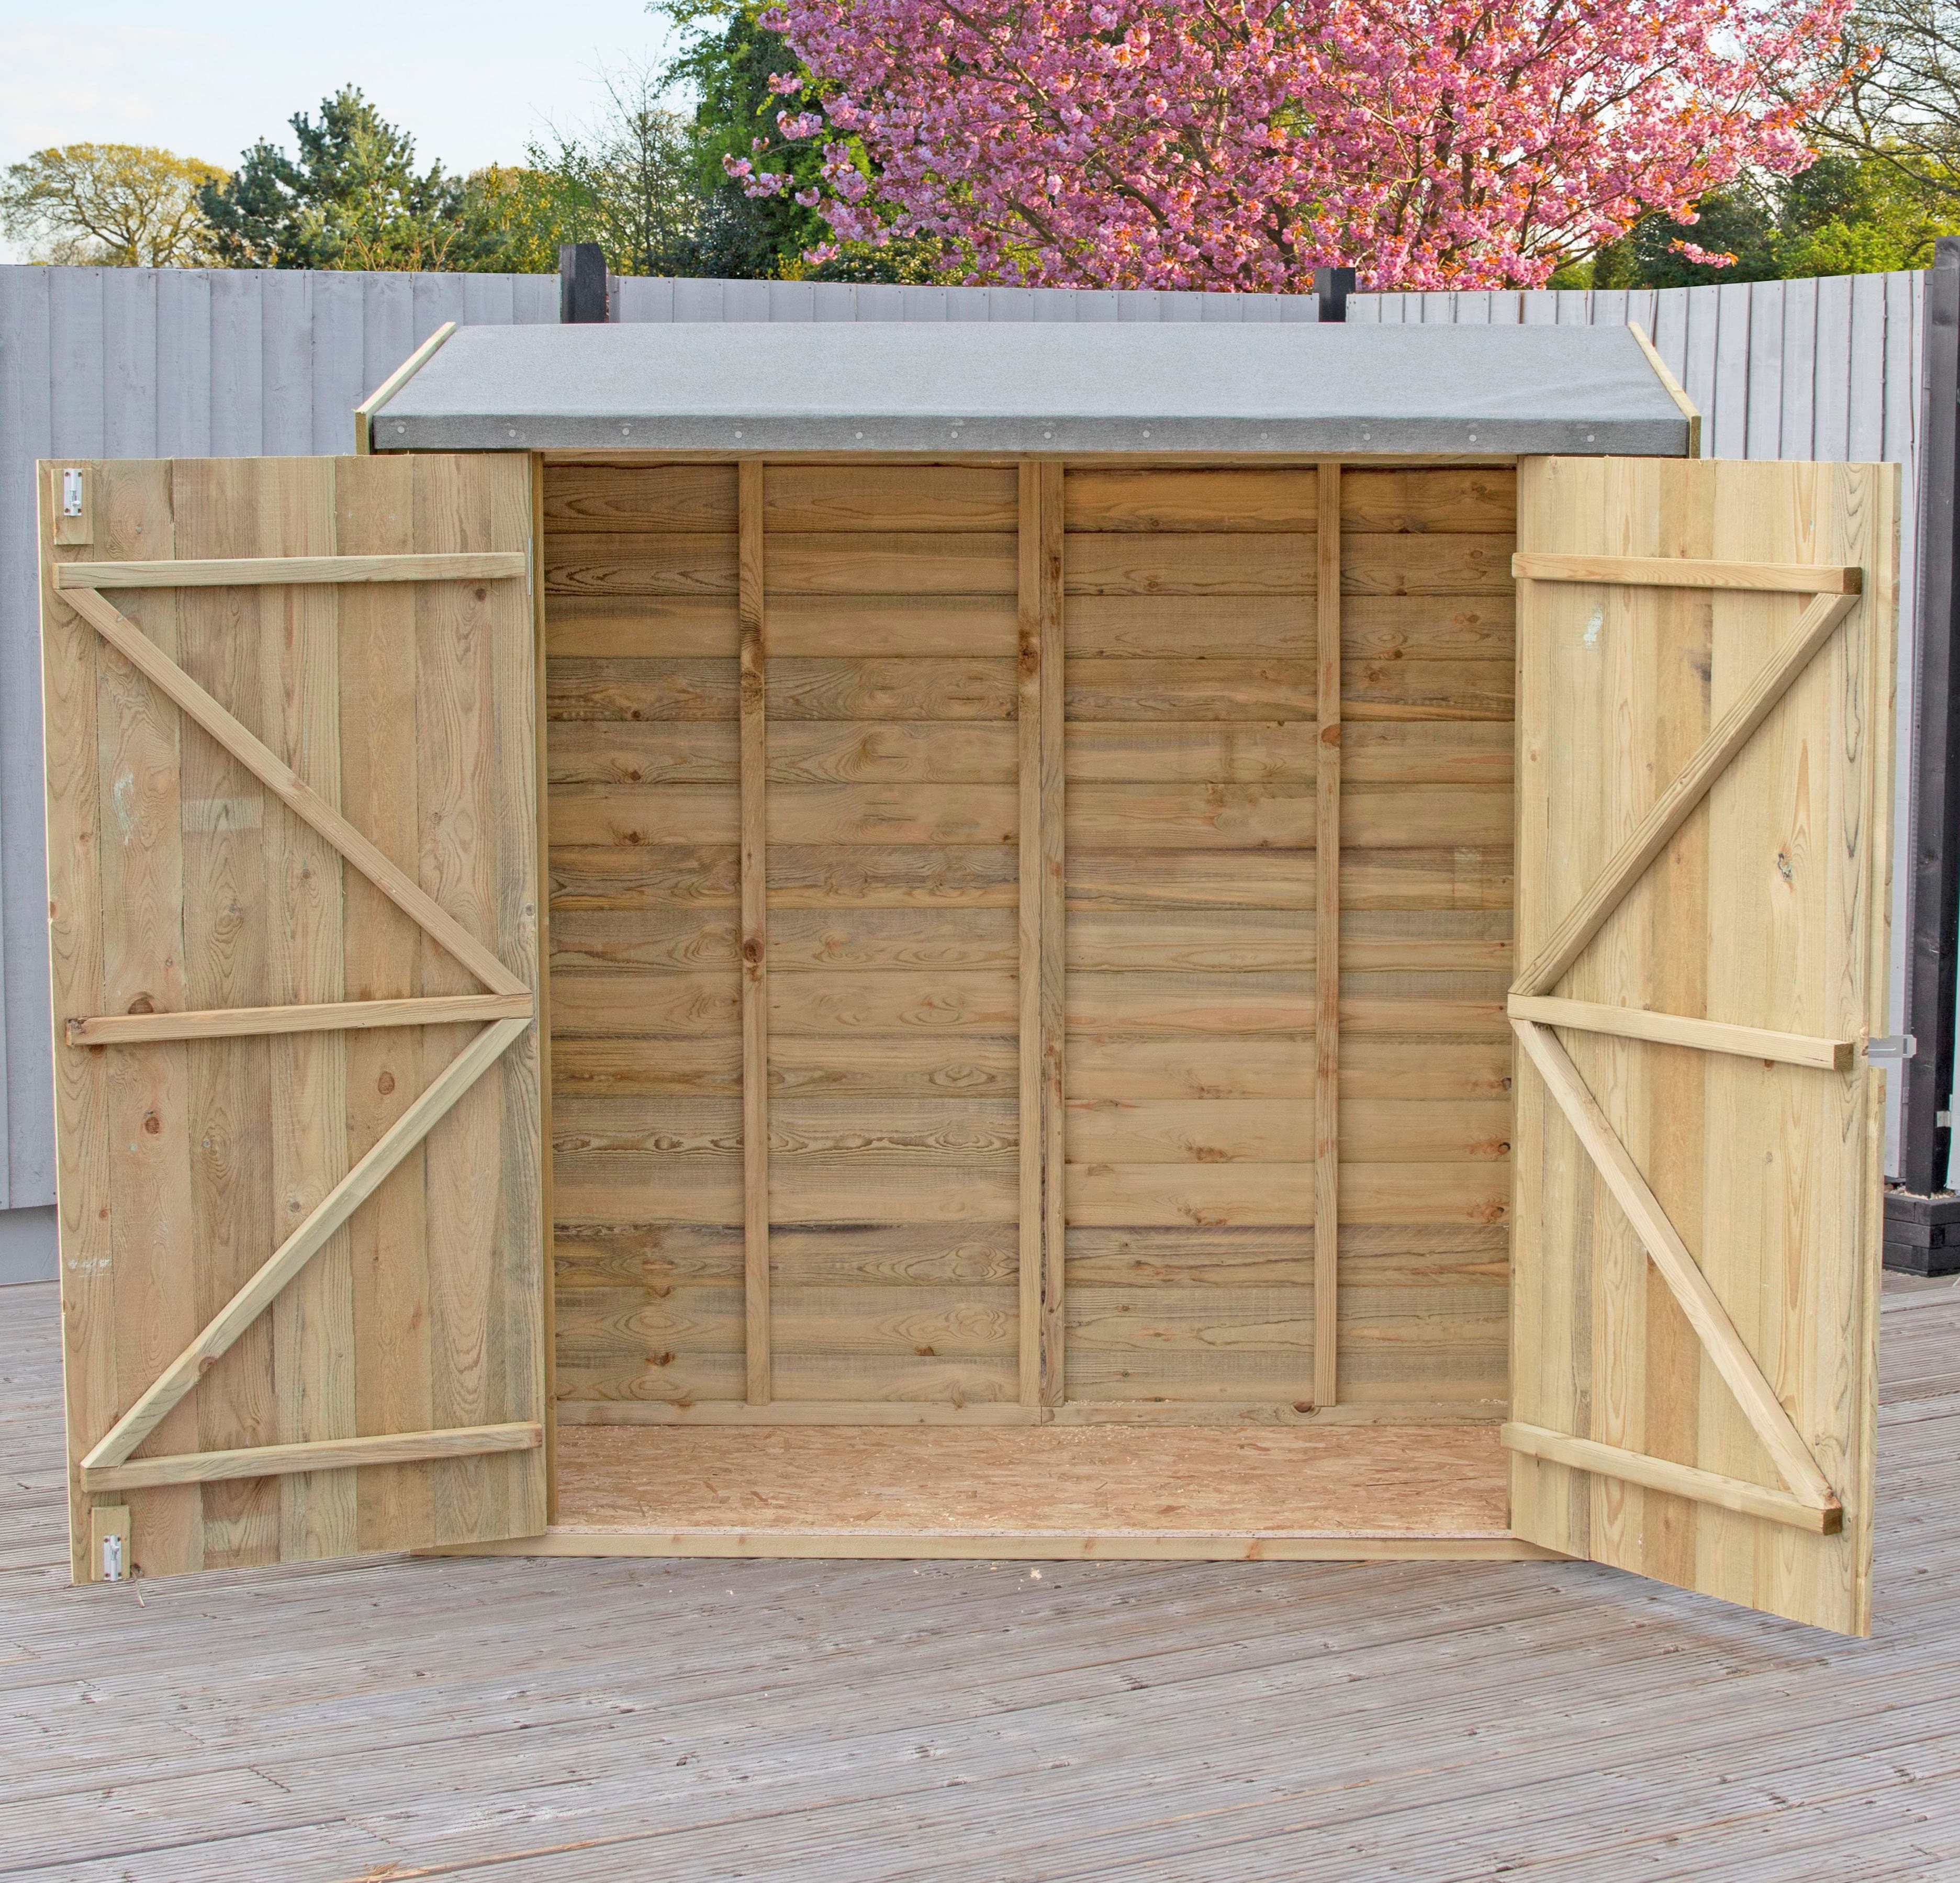 6x3ft | Wooden Overlap Pent Shed | Pressure Treated